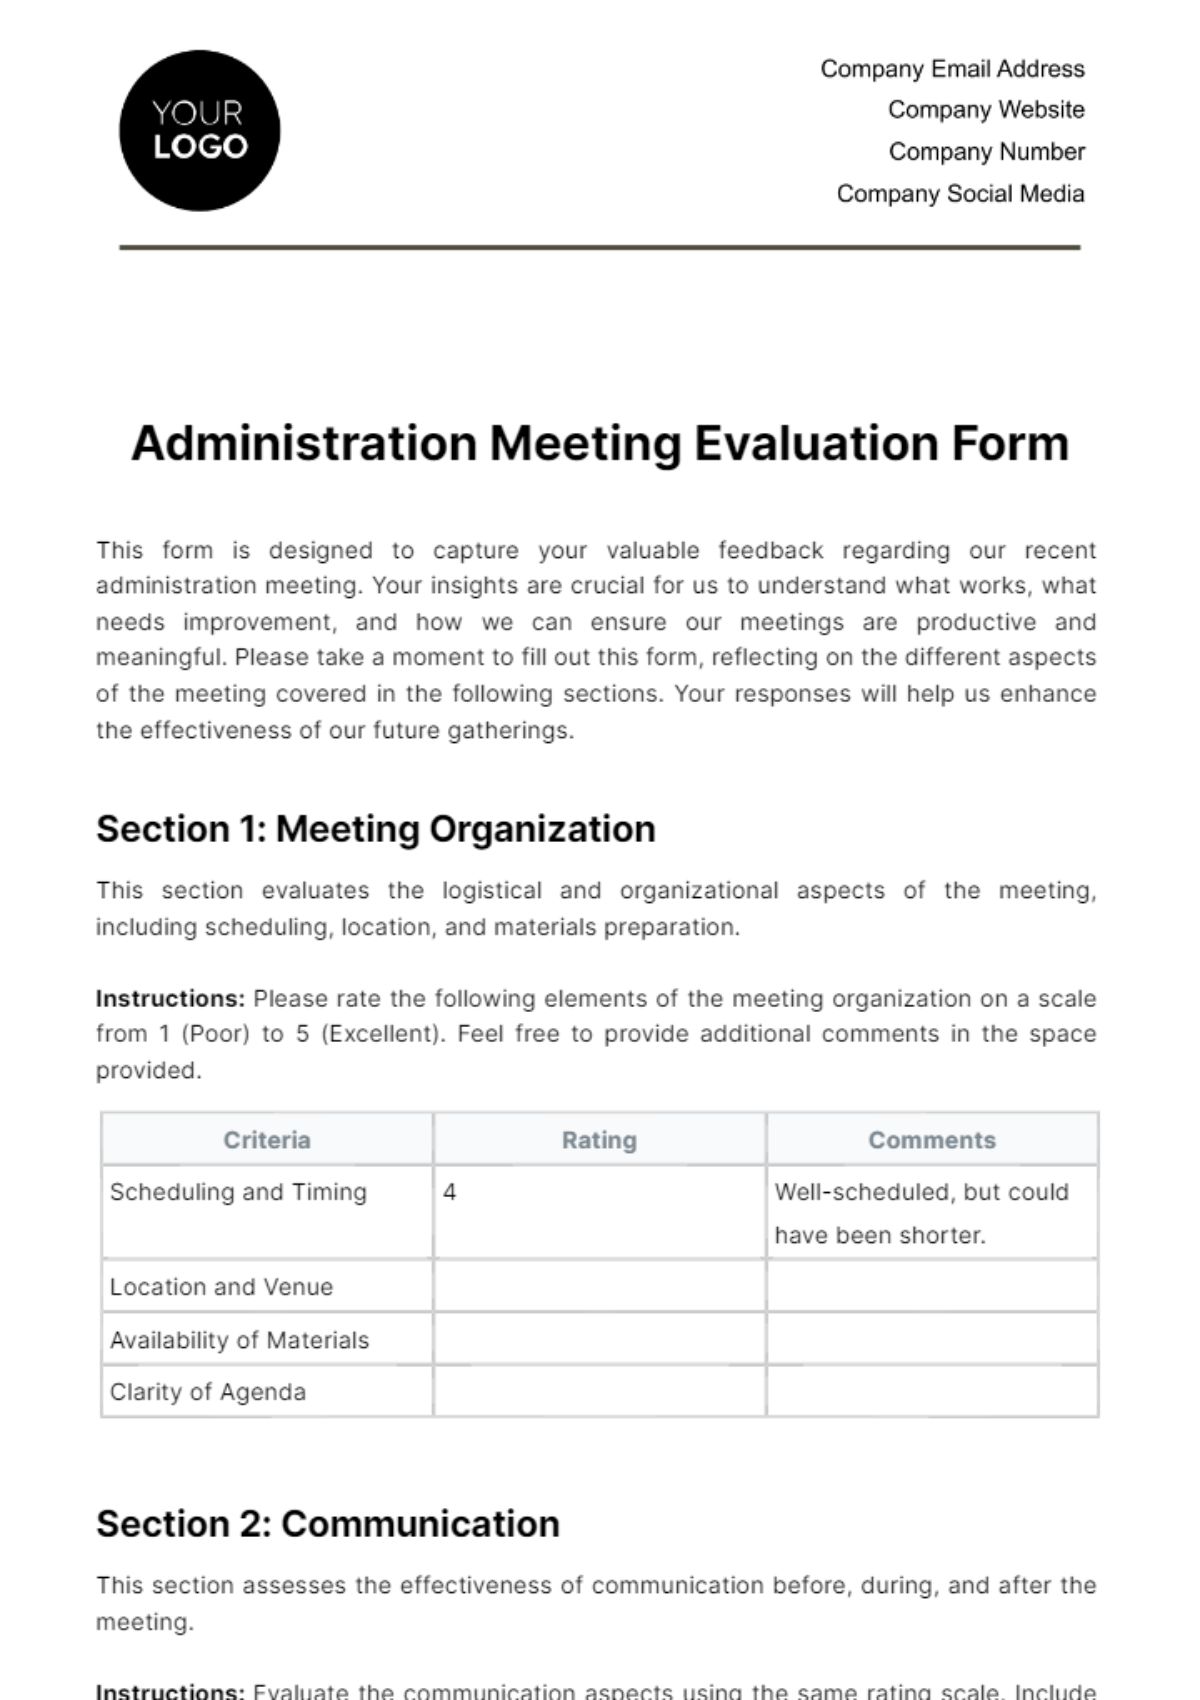 Free Administration Meeting Evaluation Form Template